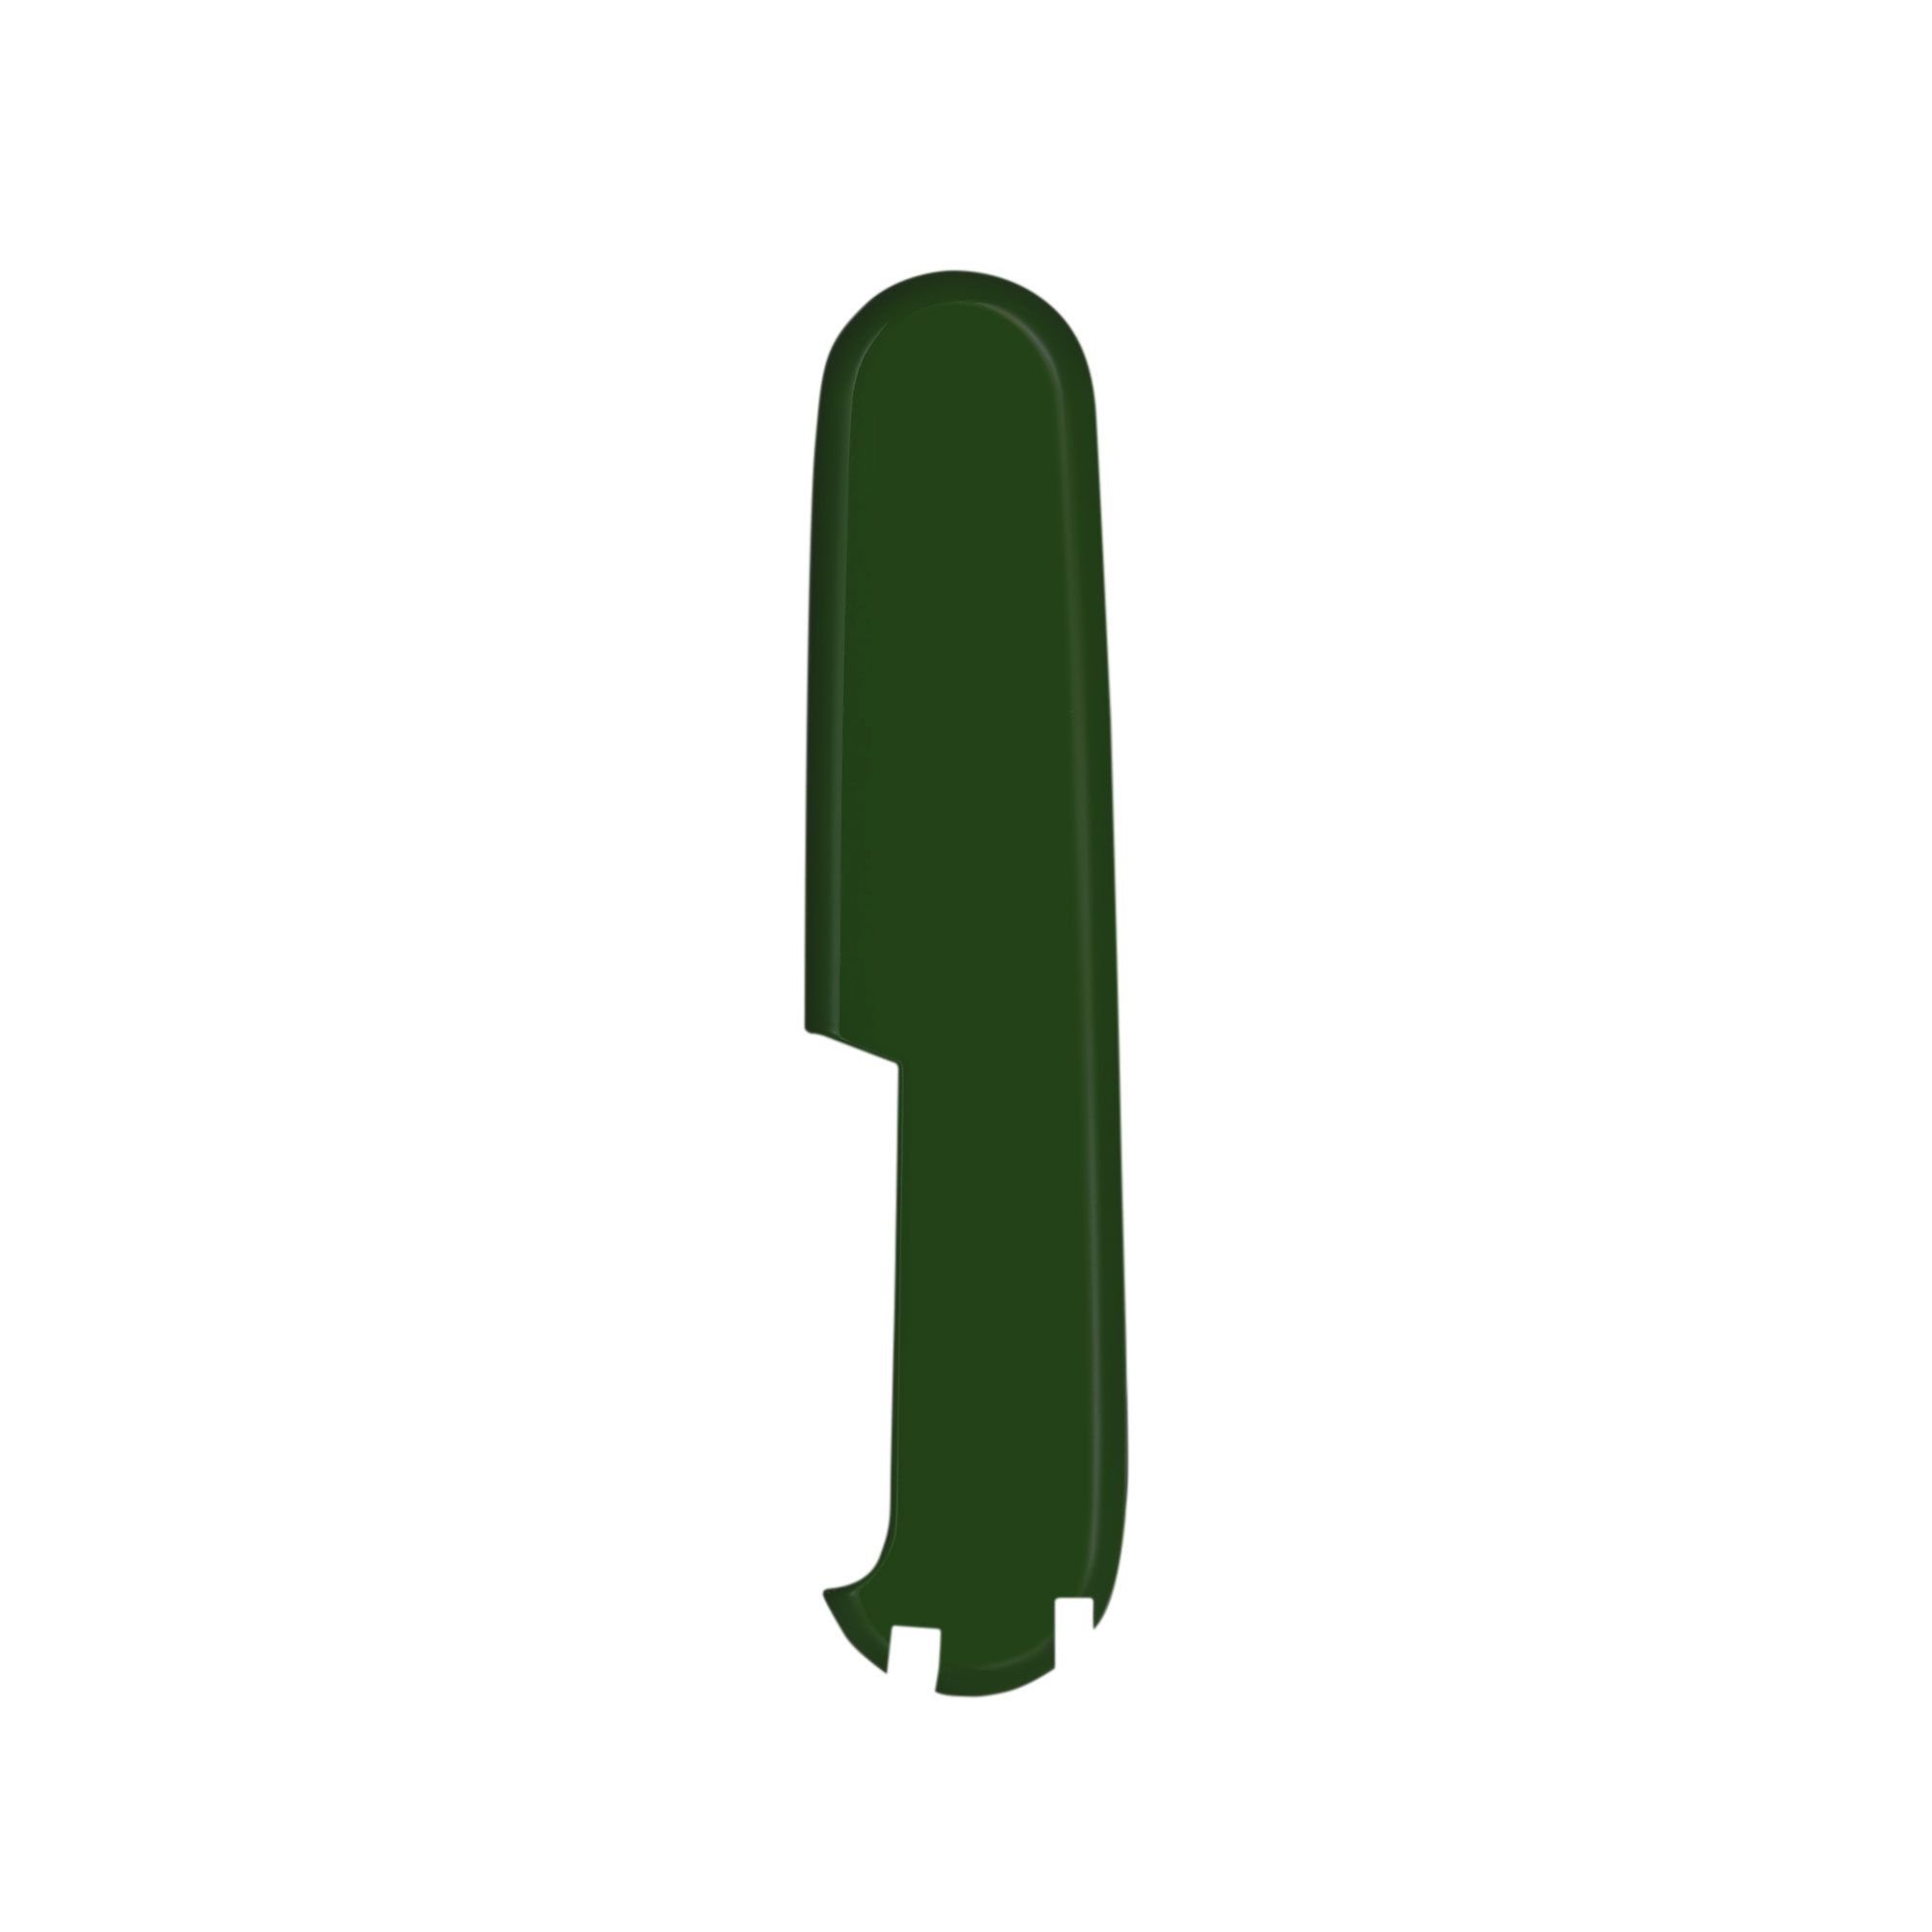 Victorinox - rear replacement handle shell 91 mm PLUS green